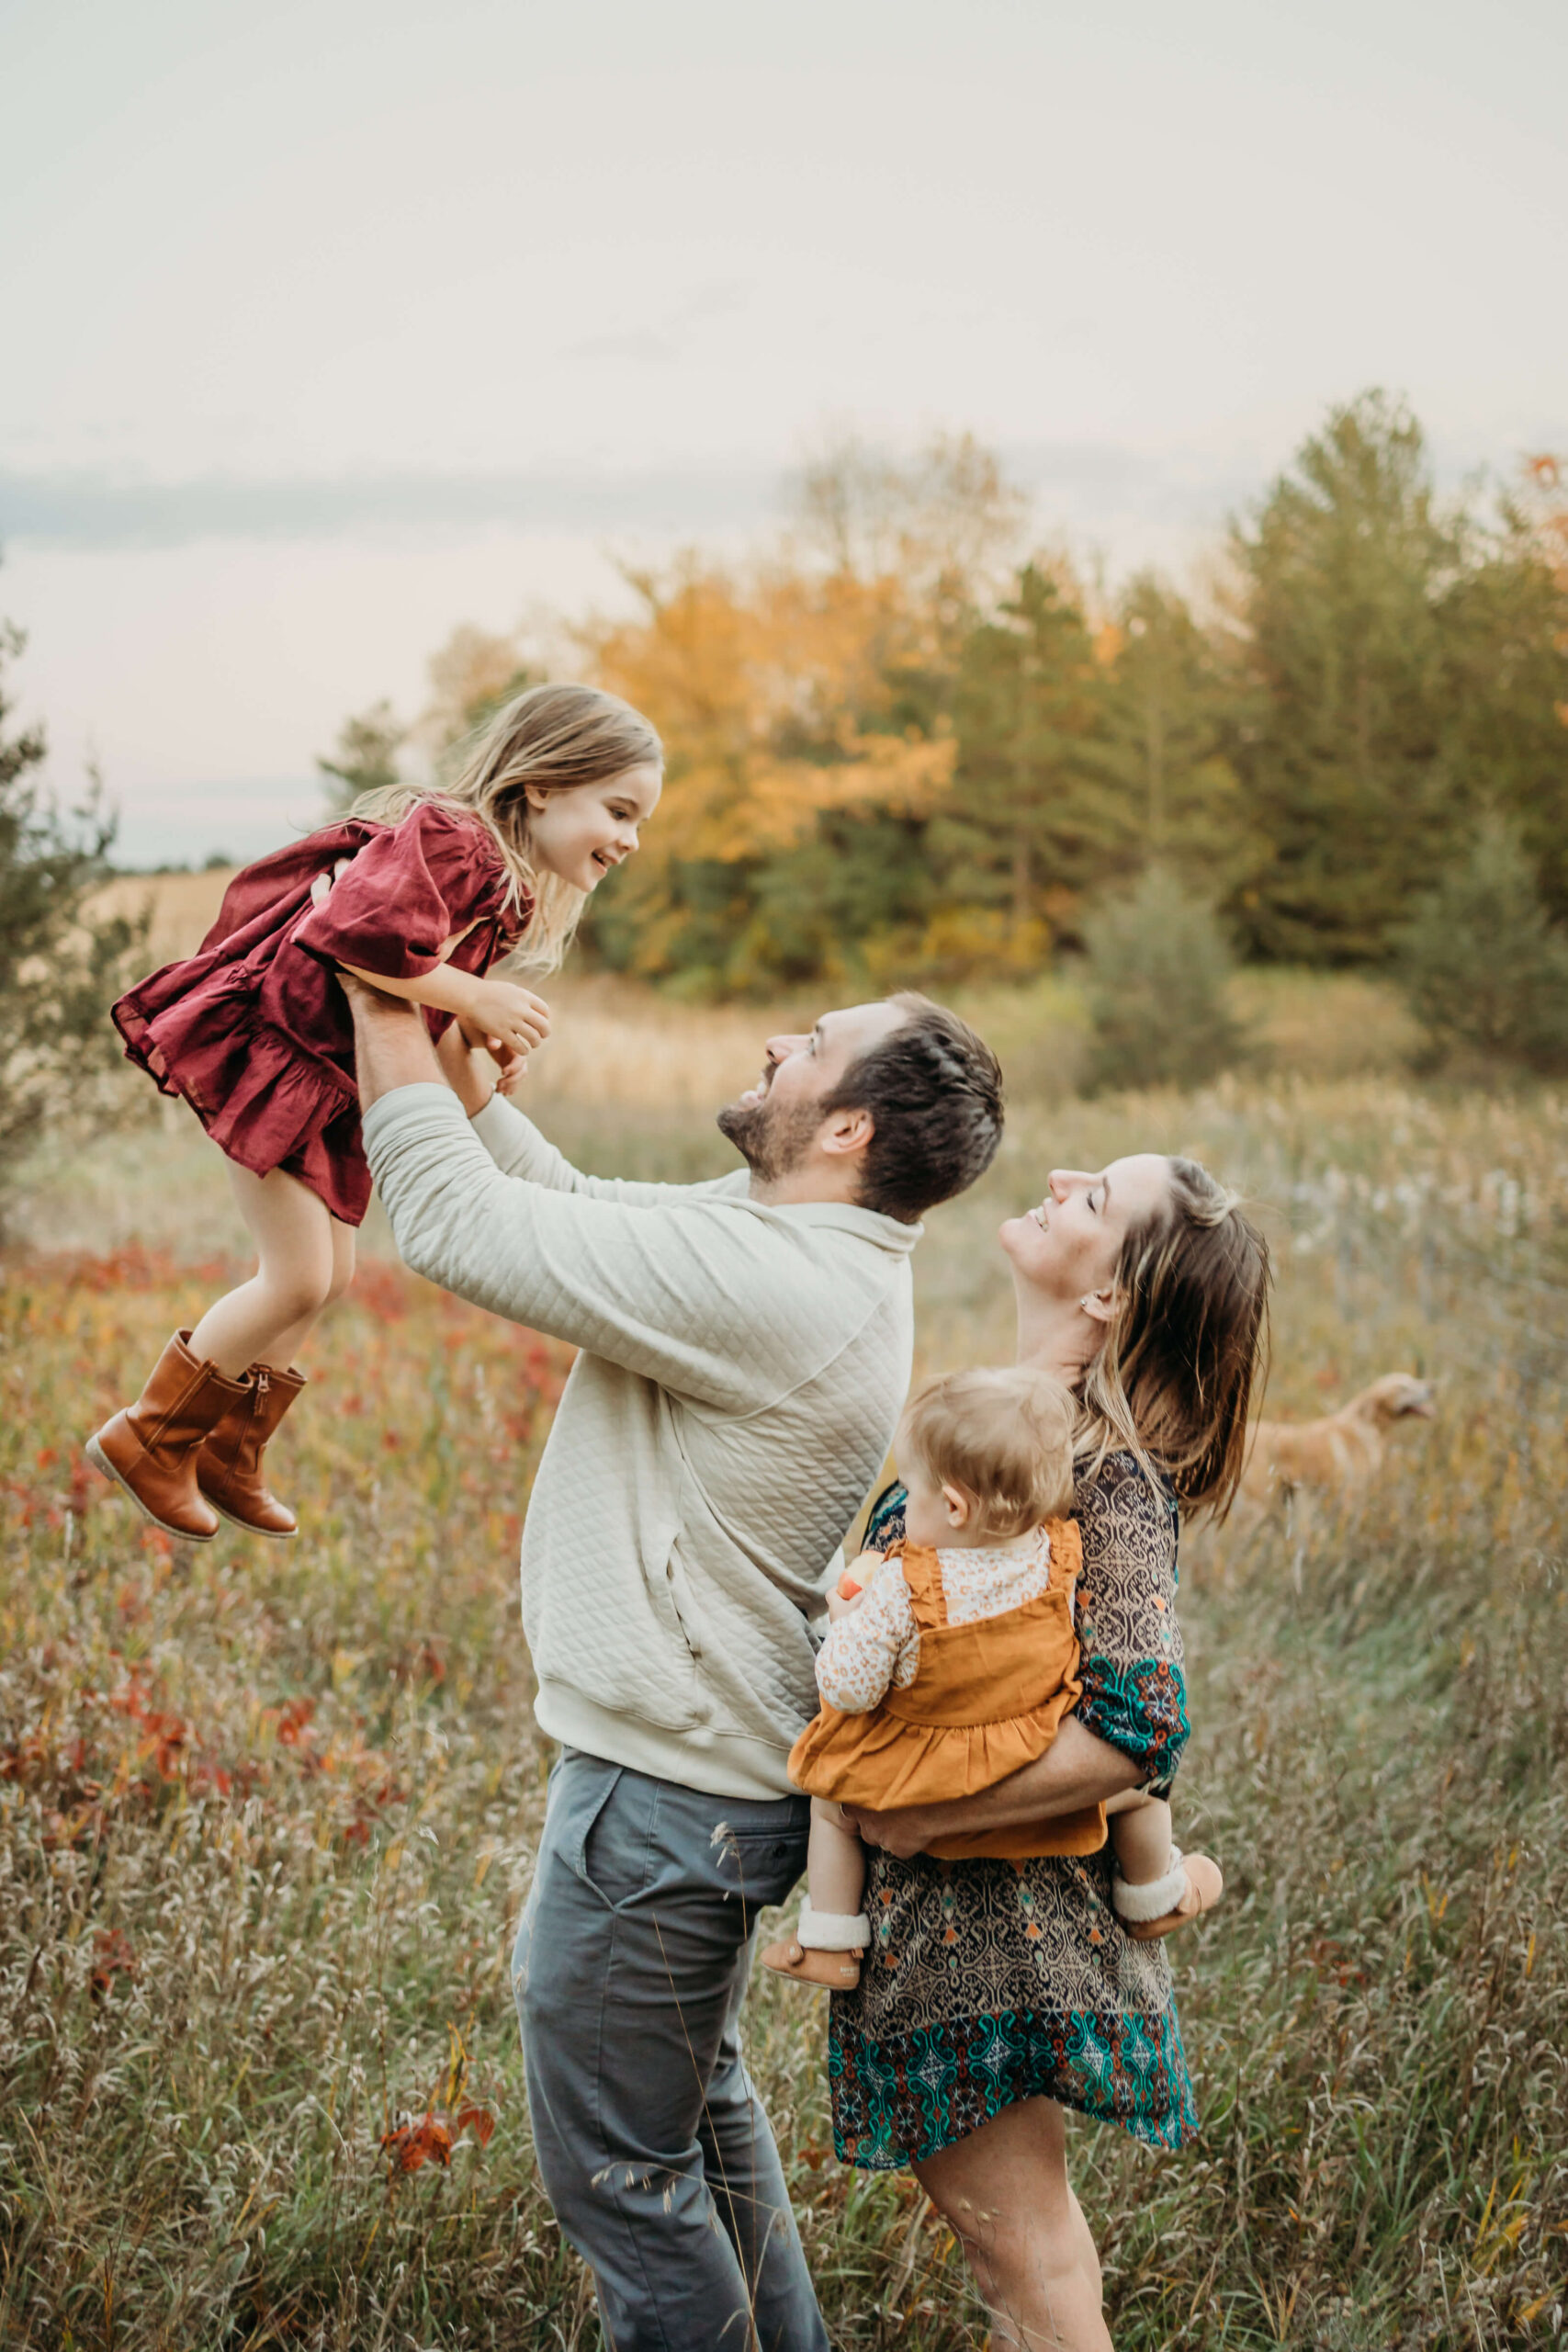 dad lifting young daughter in the air while the family laughs behind them in a field Parenthood is so precious, but it can be challenging to remember to enjoy it. By scheduling some new things to do in Eau Claire, WI, you’ll create wonderful memories your entire family will cherish. 